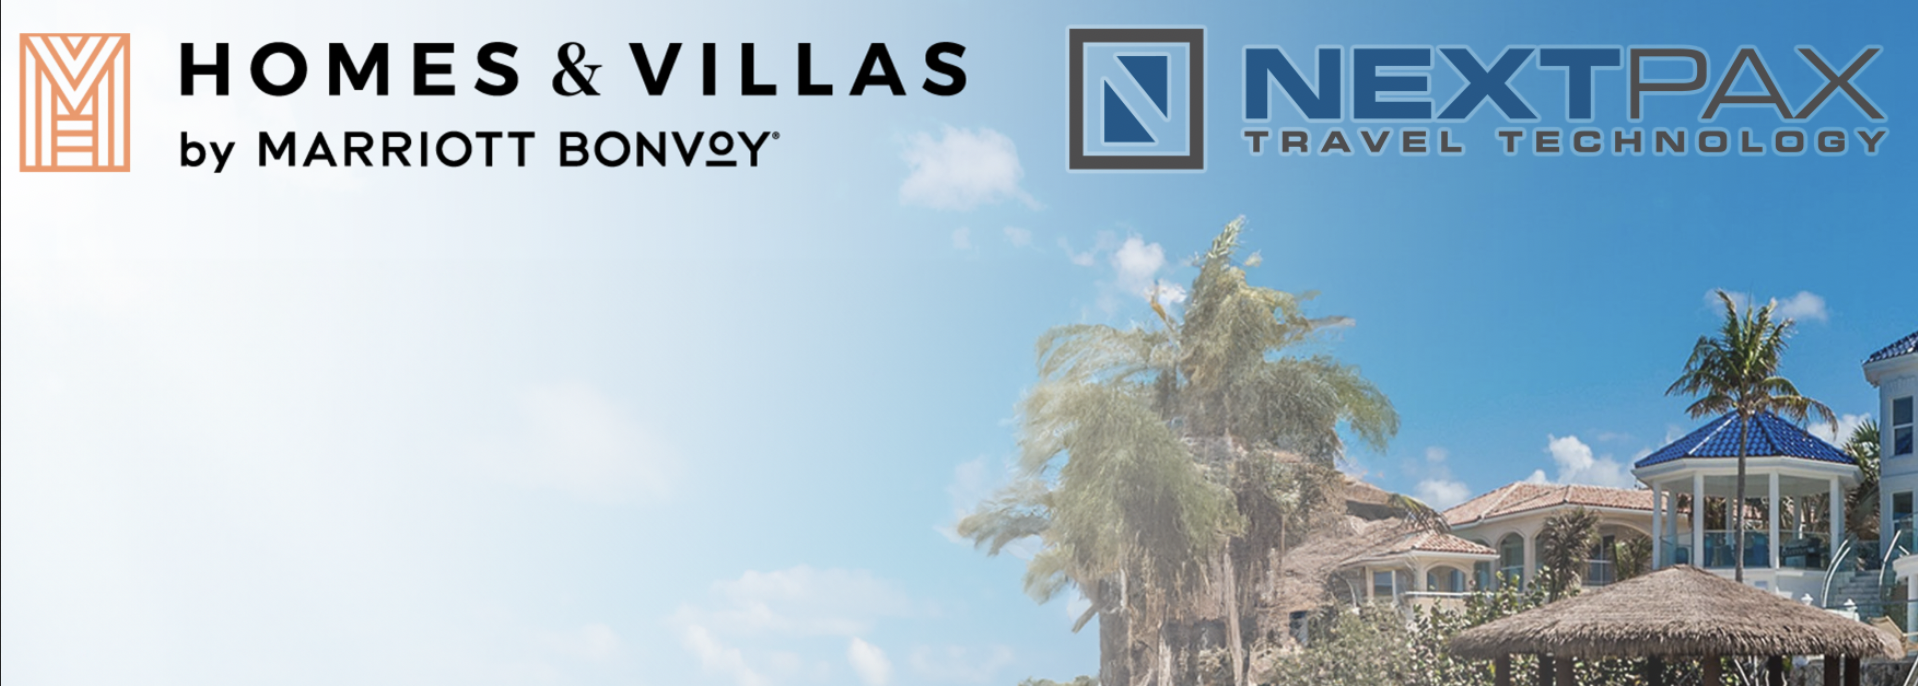 Exciting Announcement: Homes & Villas by Marriott Bonvoy 2x Points Promotion Coming in April!